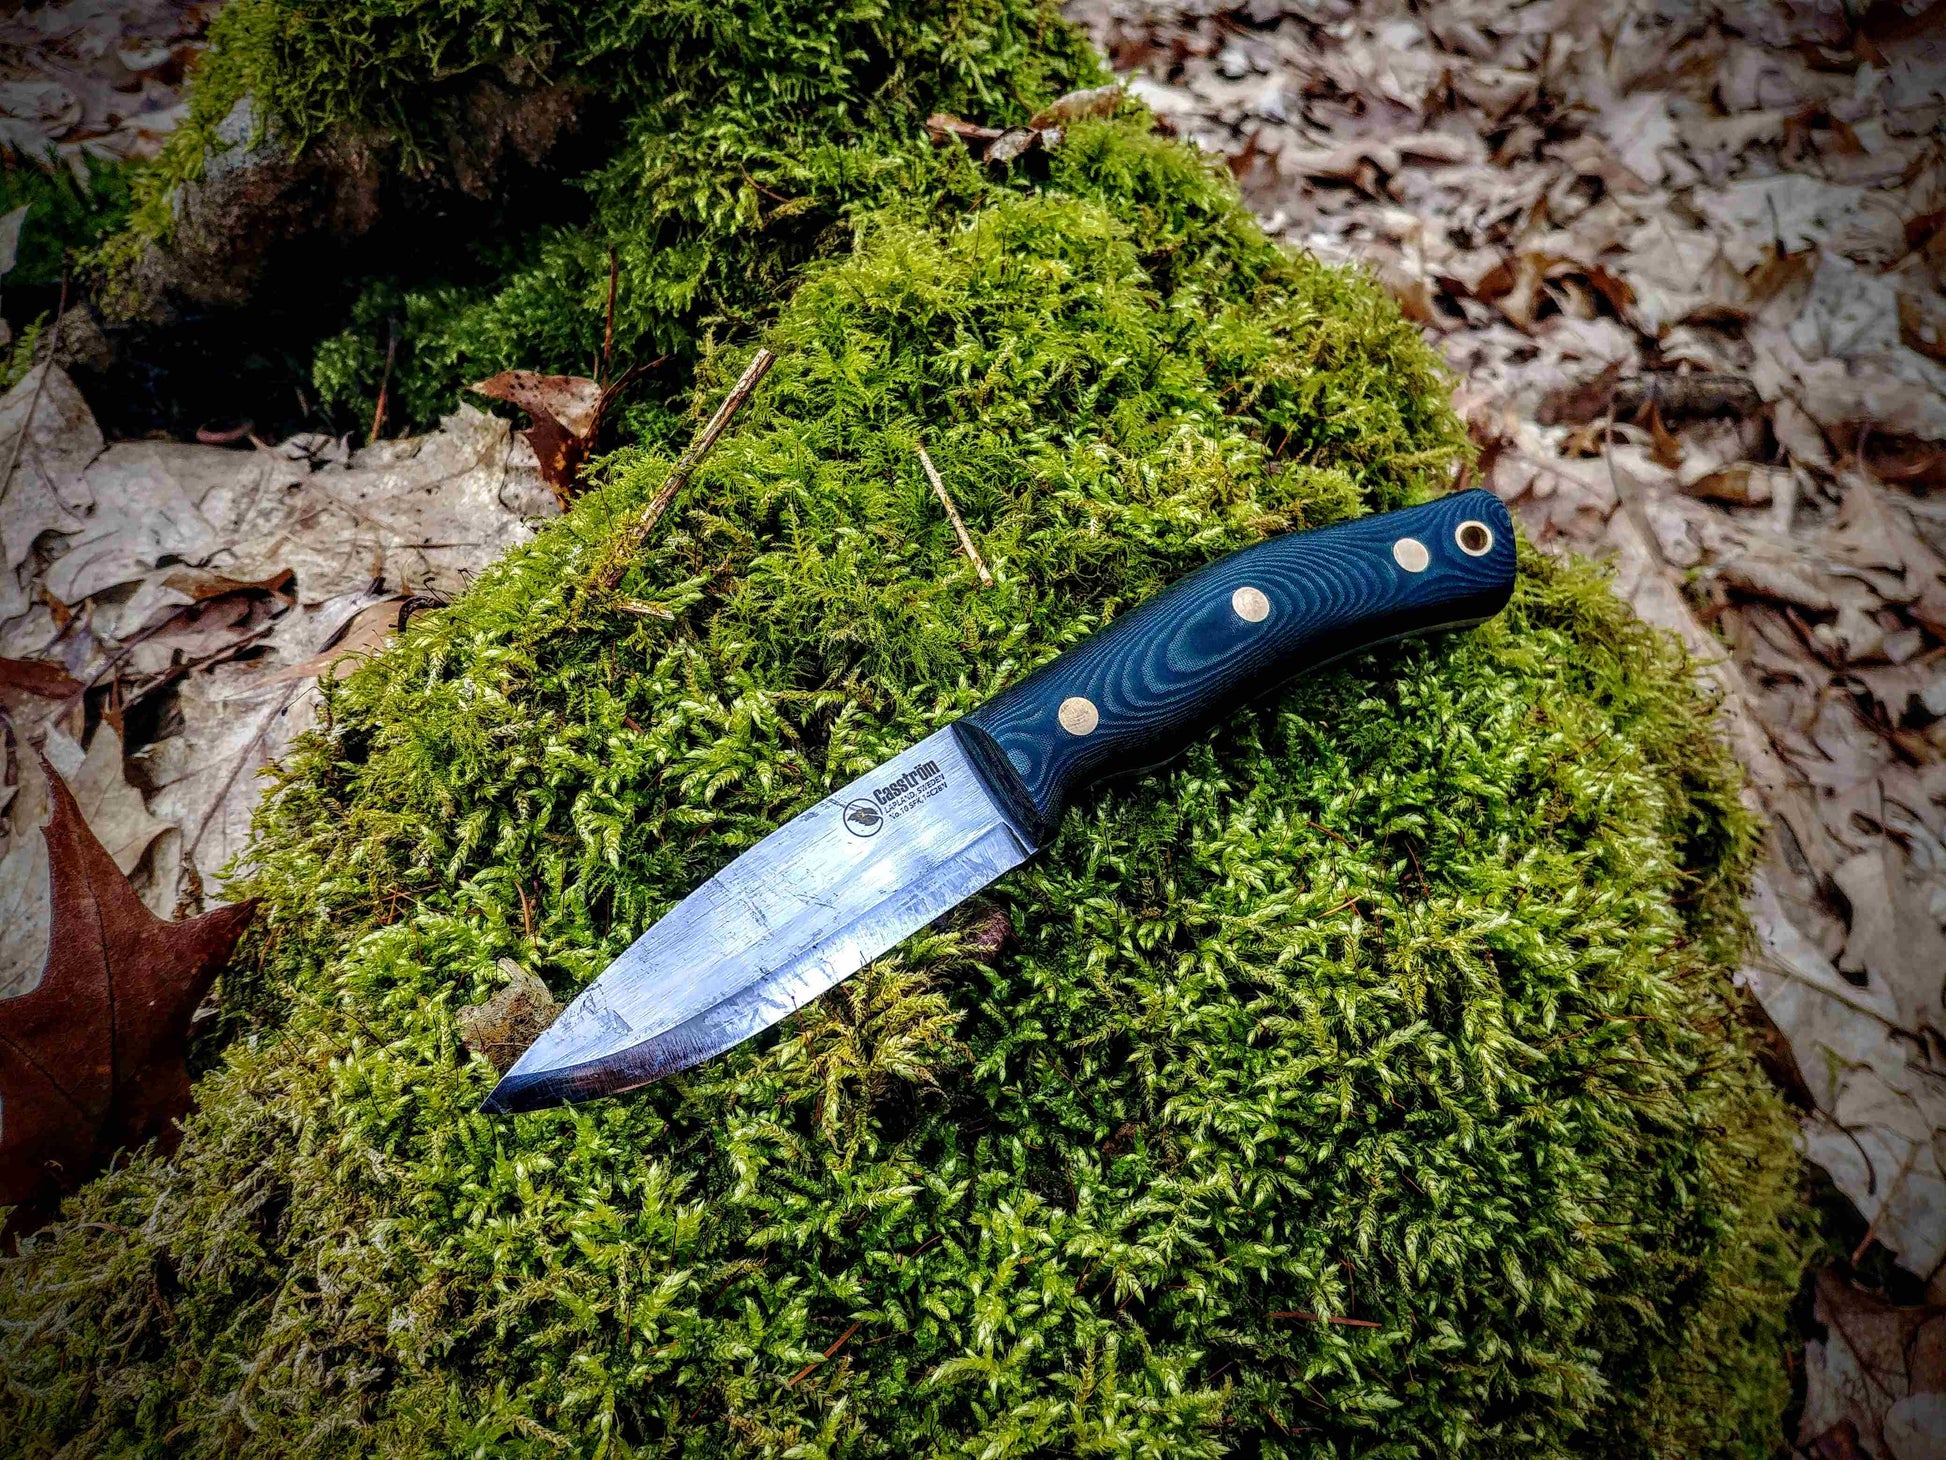 Casstrom No.10 swedish forest knife, in green micarta, lying on a bed of moss